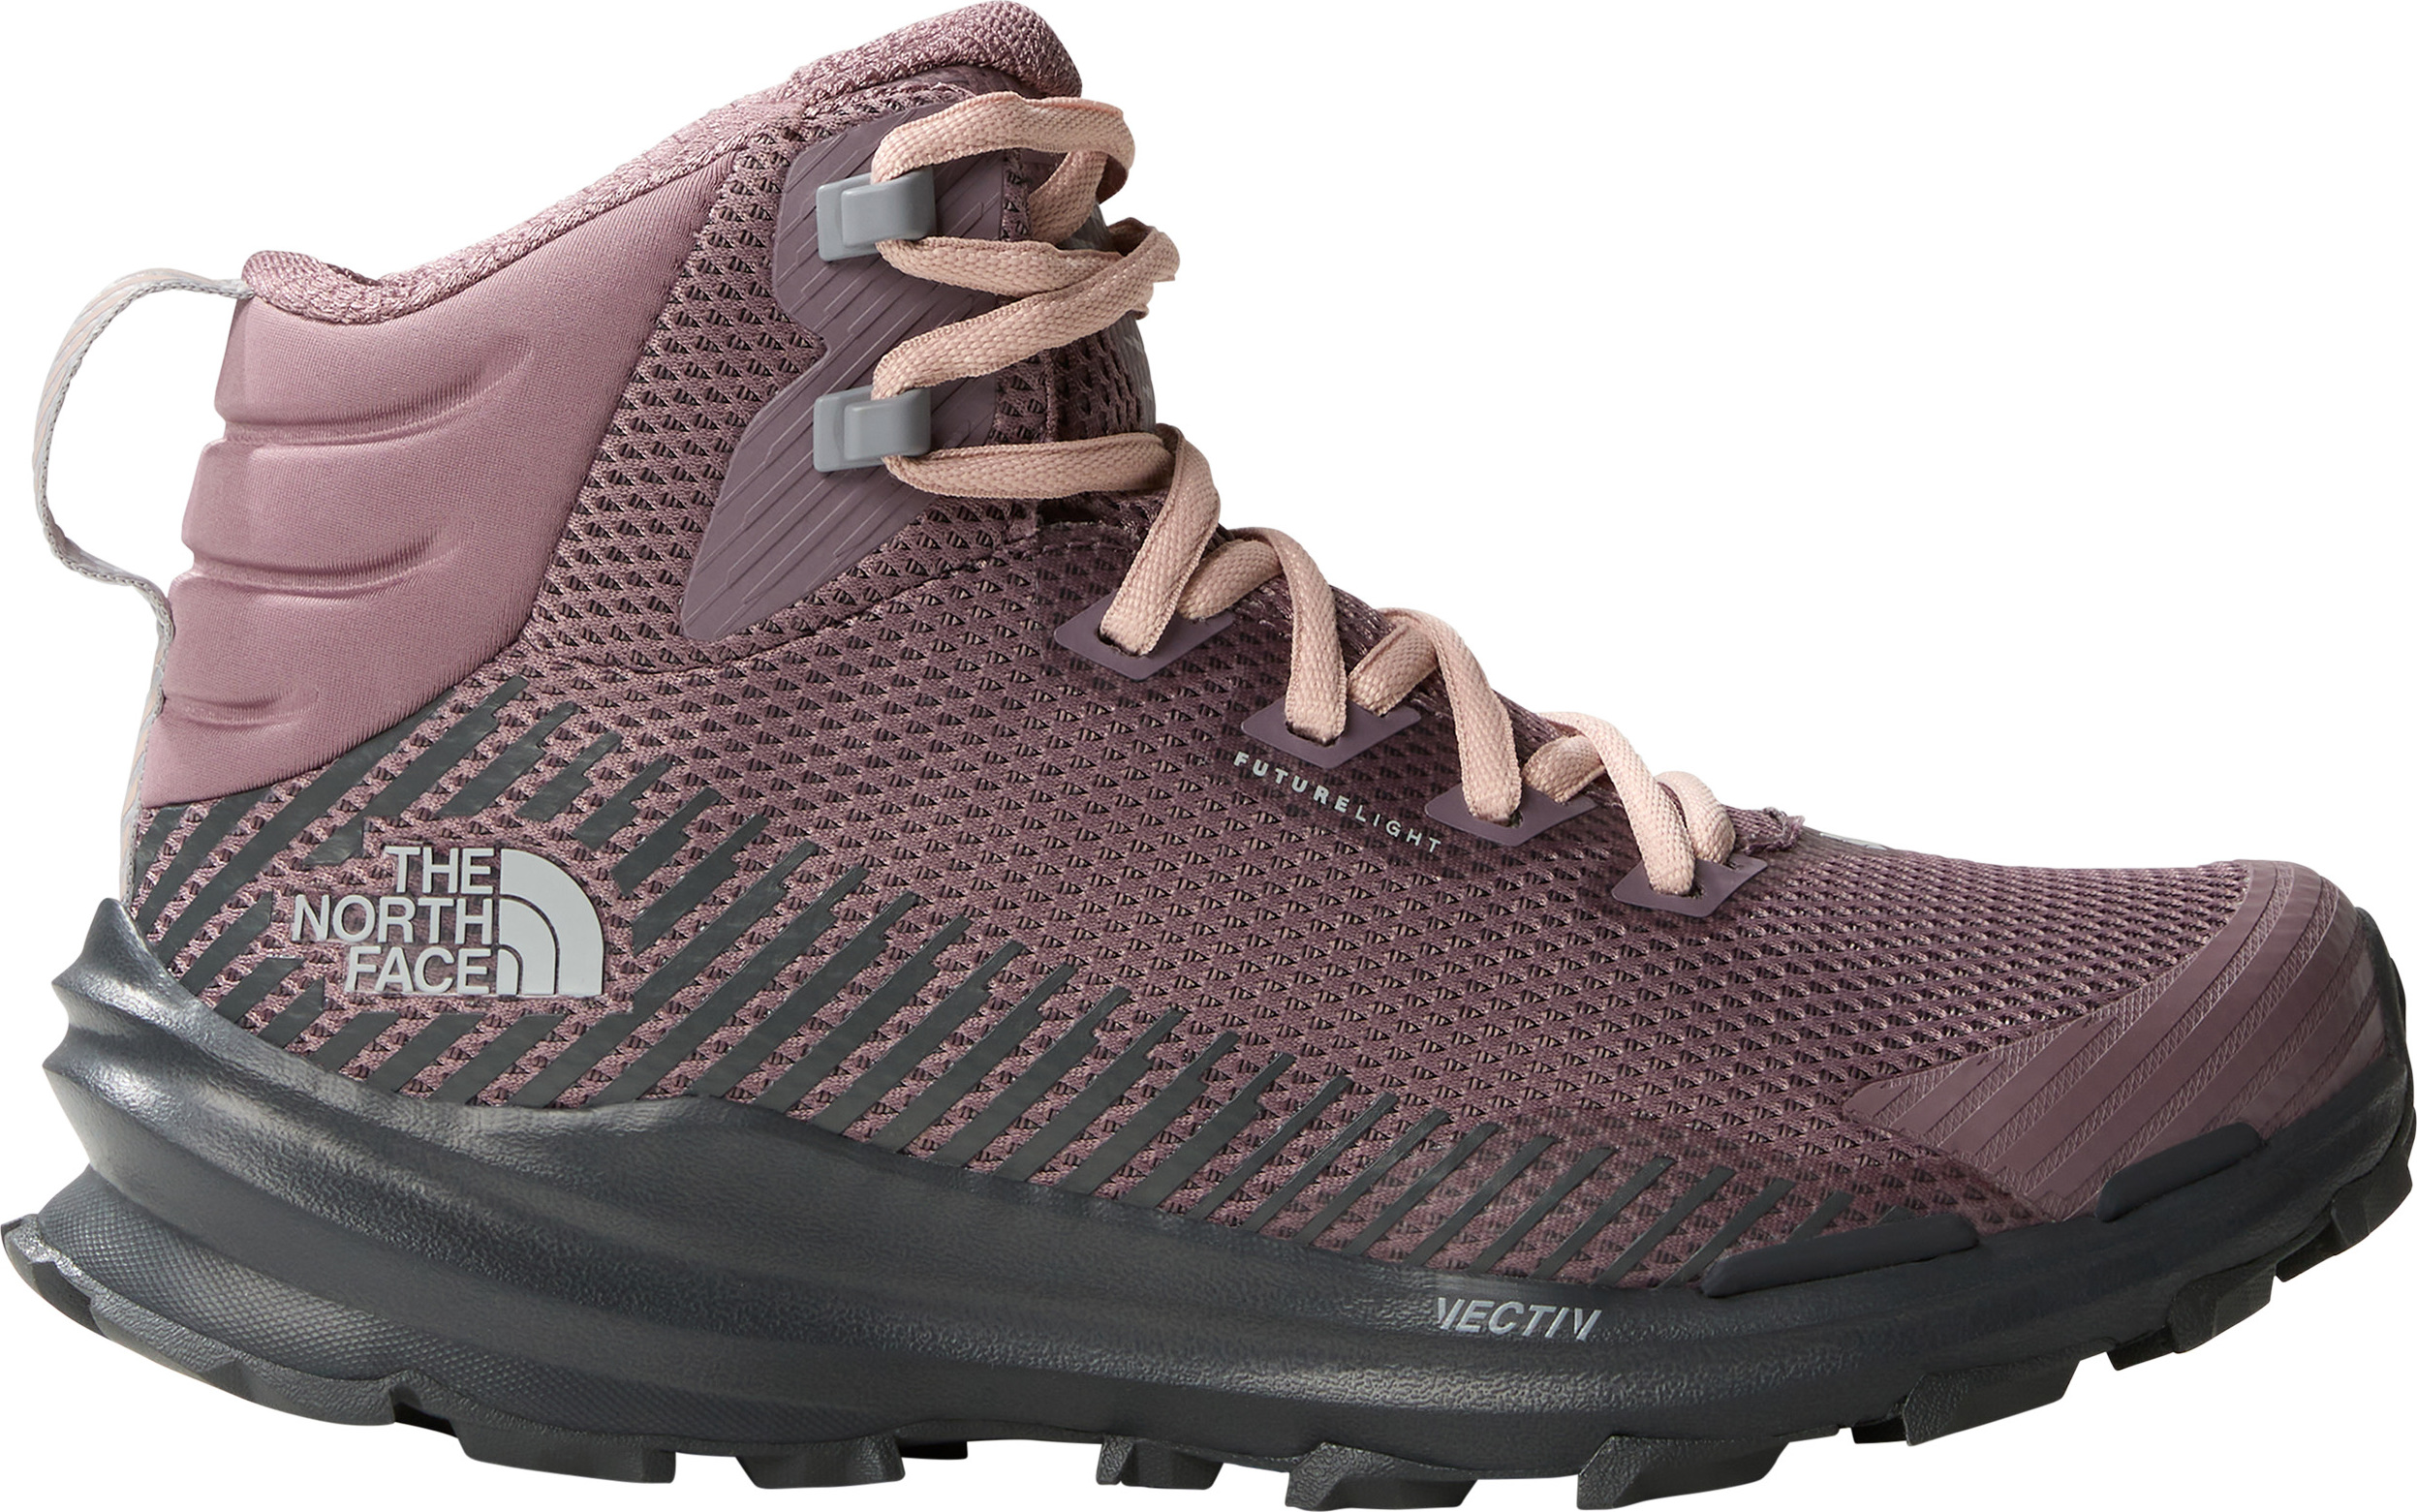 The North Face Women’s Vectiv Fastpack Futurelight Hiking Boots Fawn Grey/Asphalt Grey